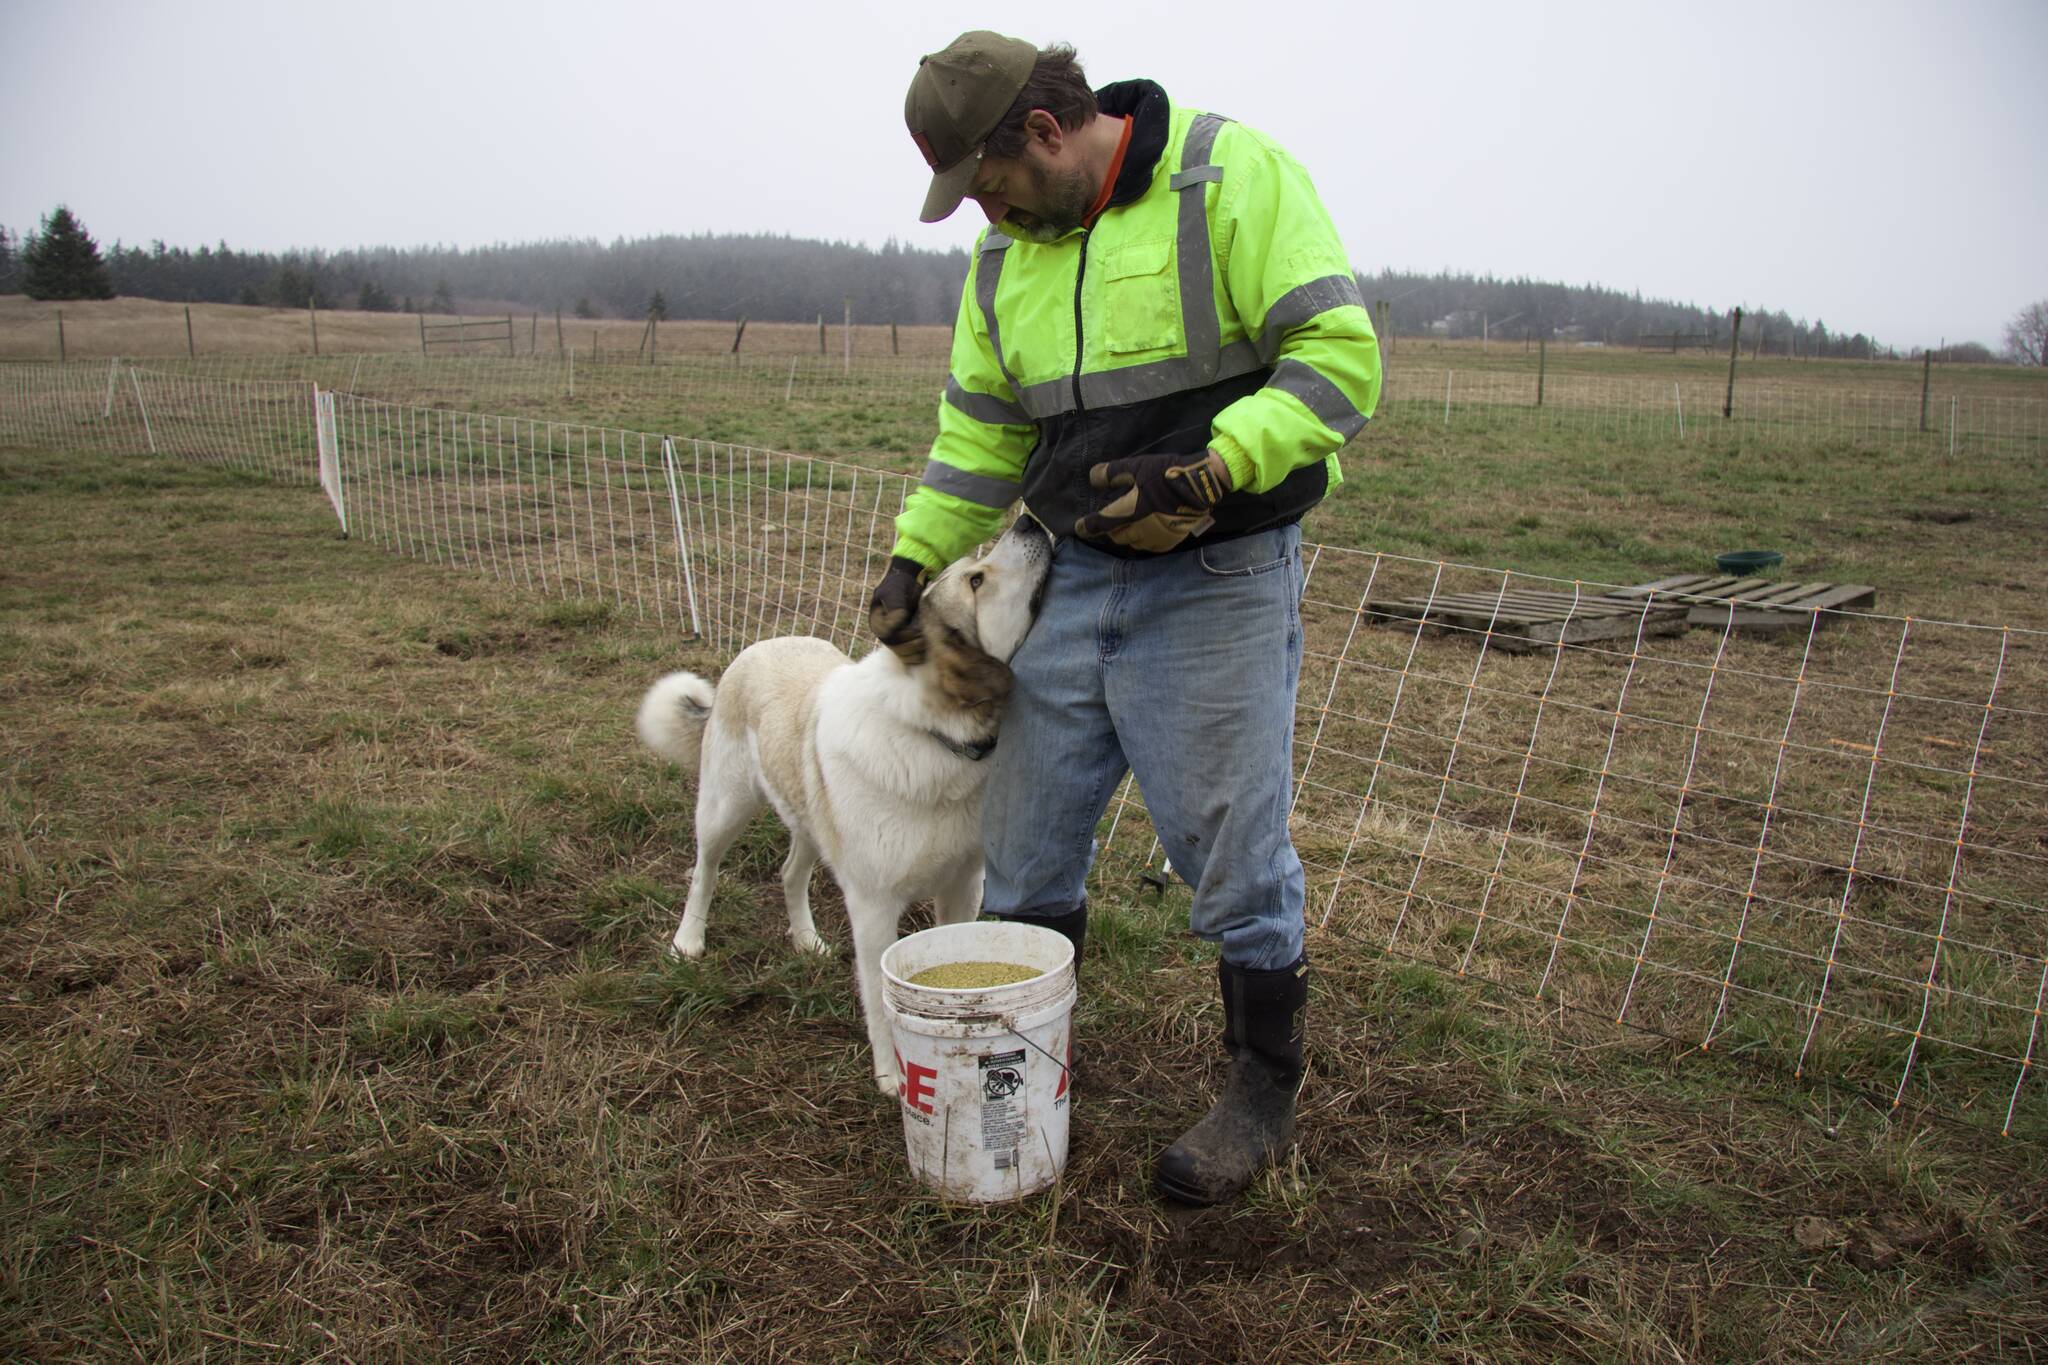 Guarding the flock: Hen farms depend on specialised canine